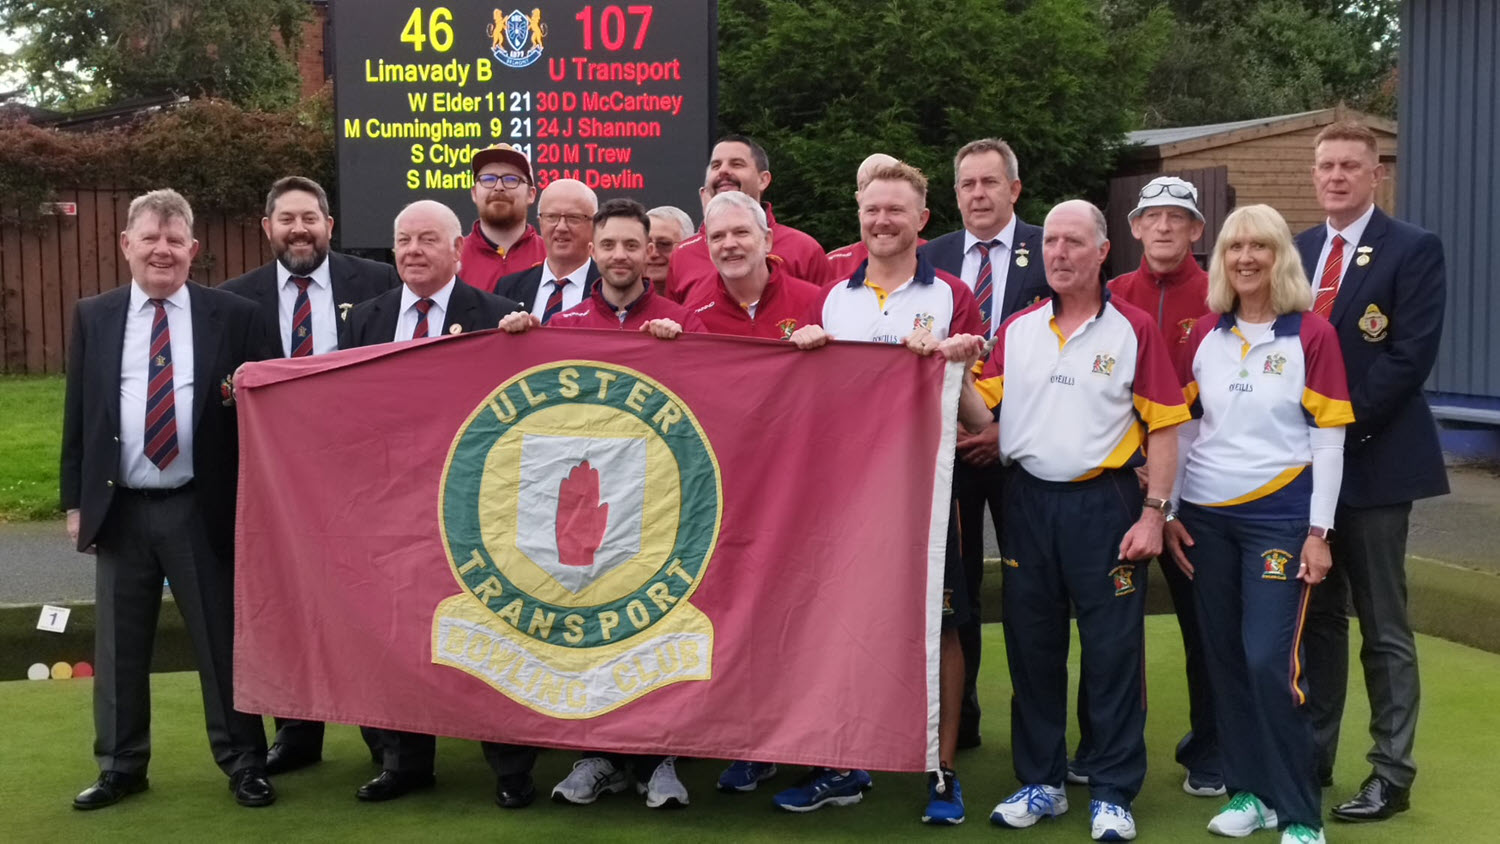 IBA Intermediate Cup Final 2023   The Champions with the Ulster Transport BC flag